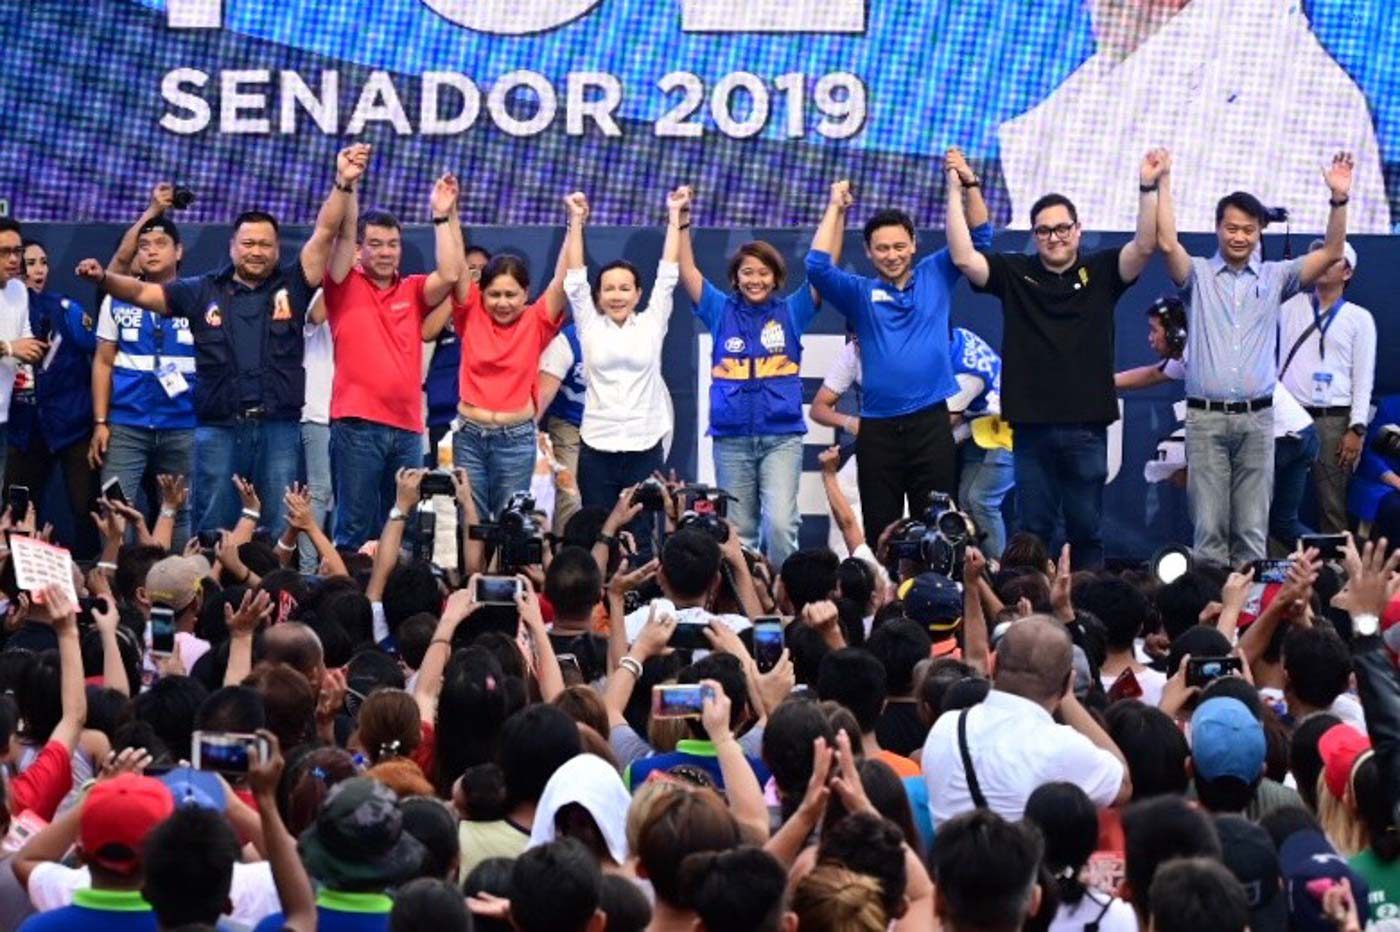 7 reelectionist senators band together for 2019 campaign, elections